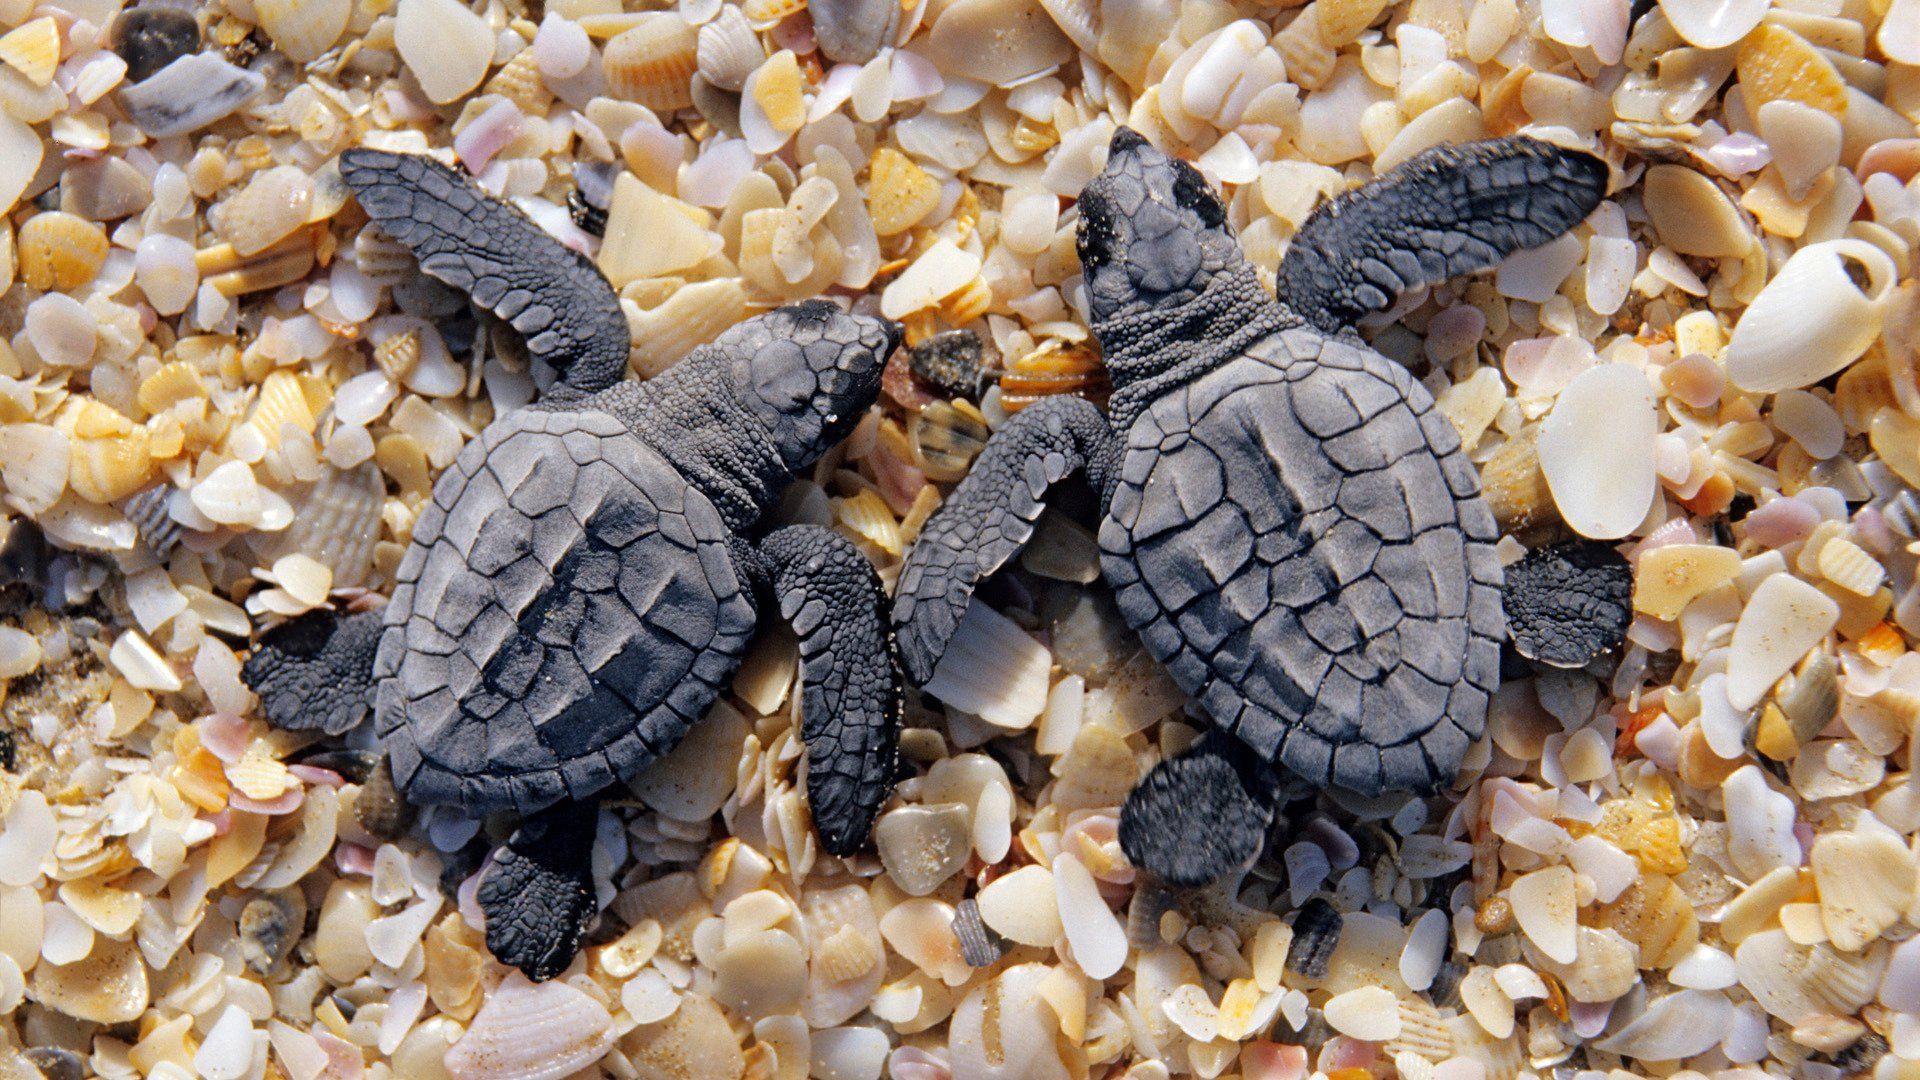 A pair of baby sea turtles crawl over a bed of seashells. - Turtle